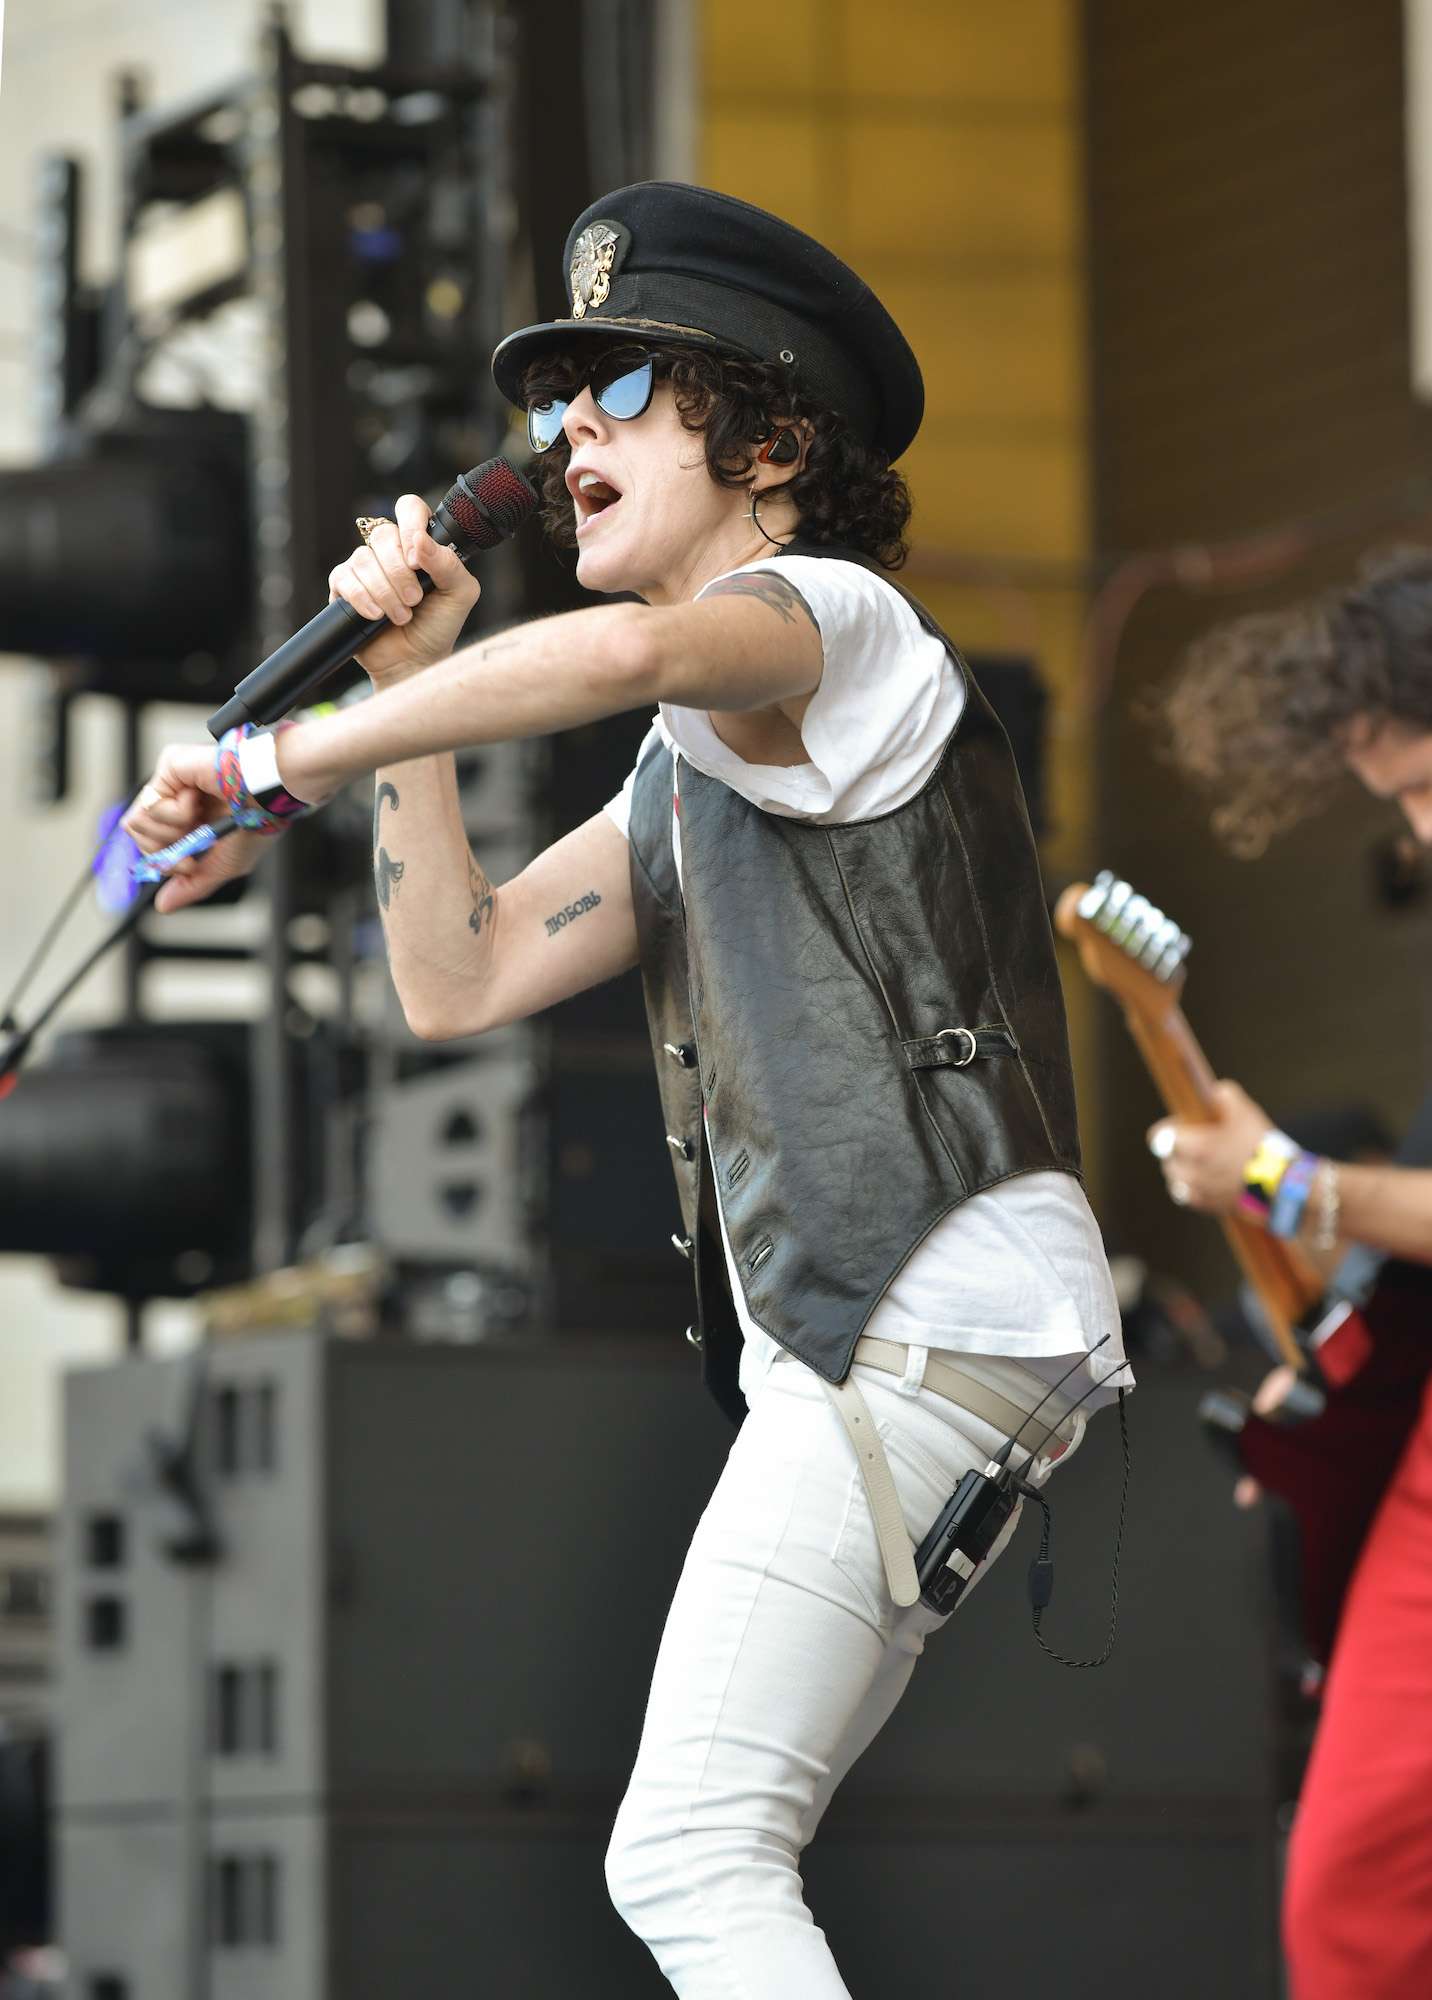 LP Live at Lollapalooza [GALLERY] 8